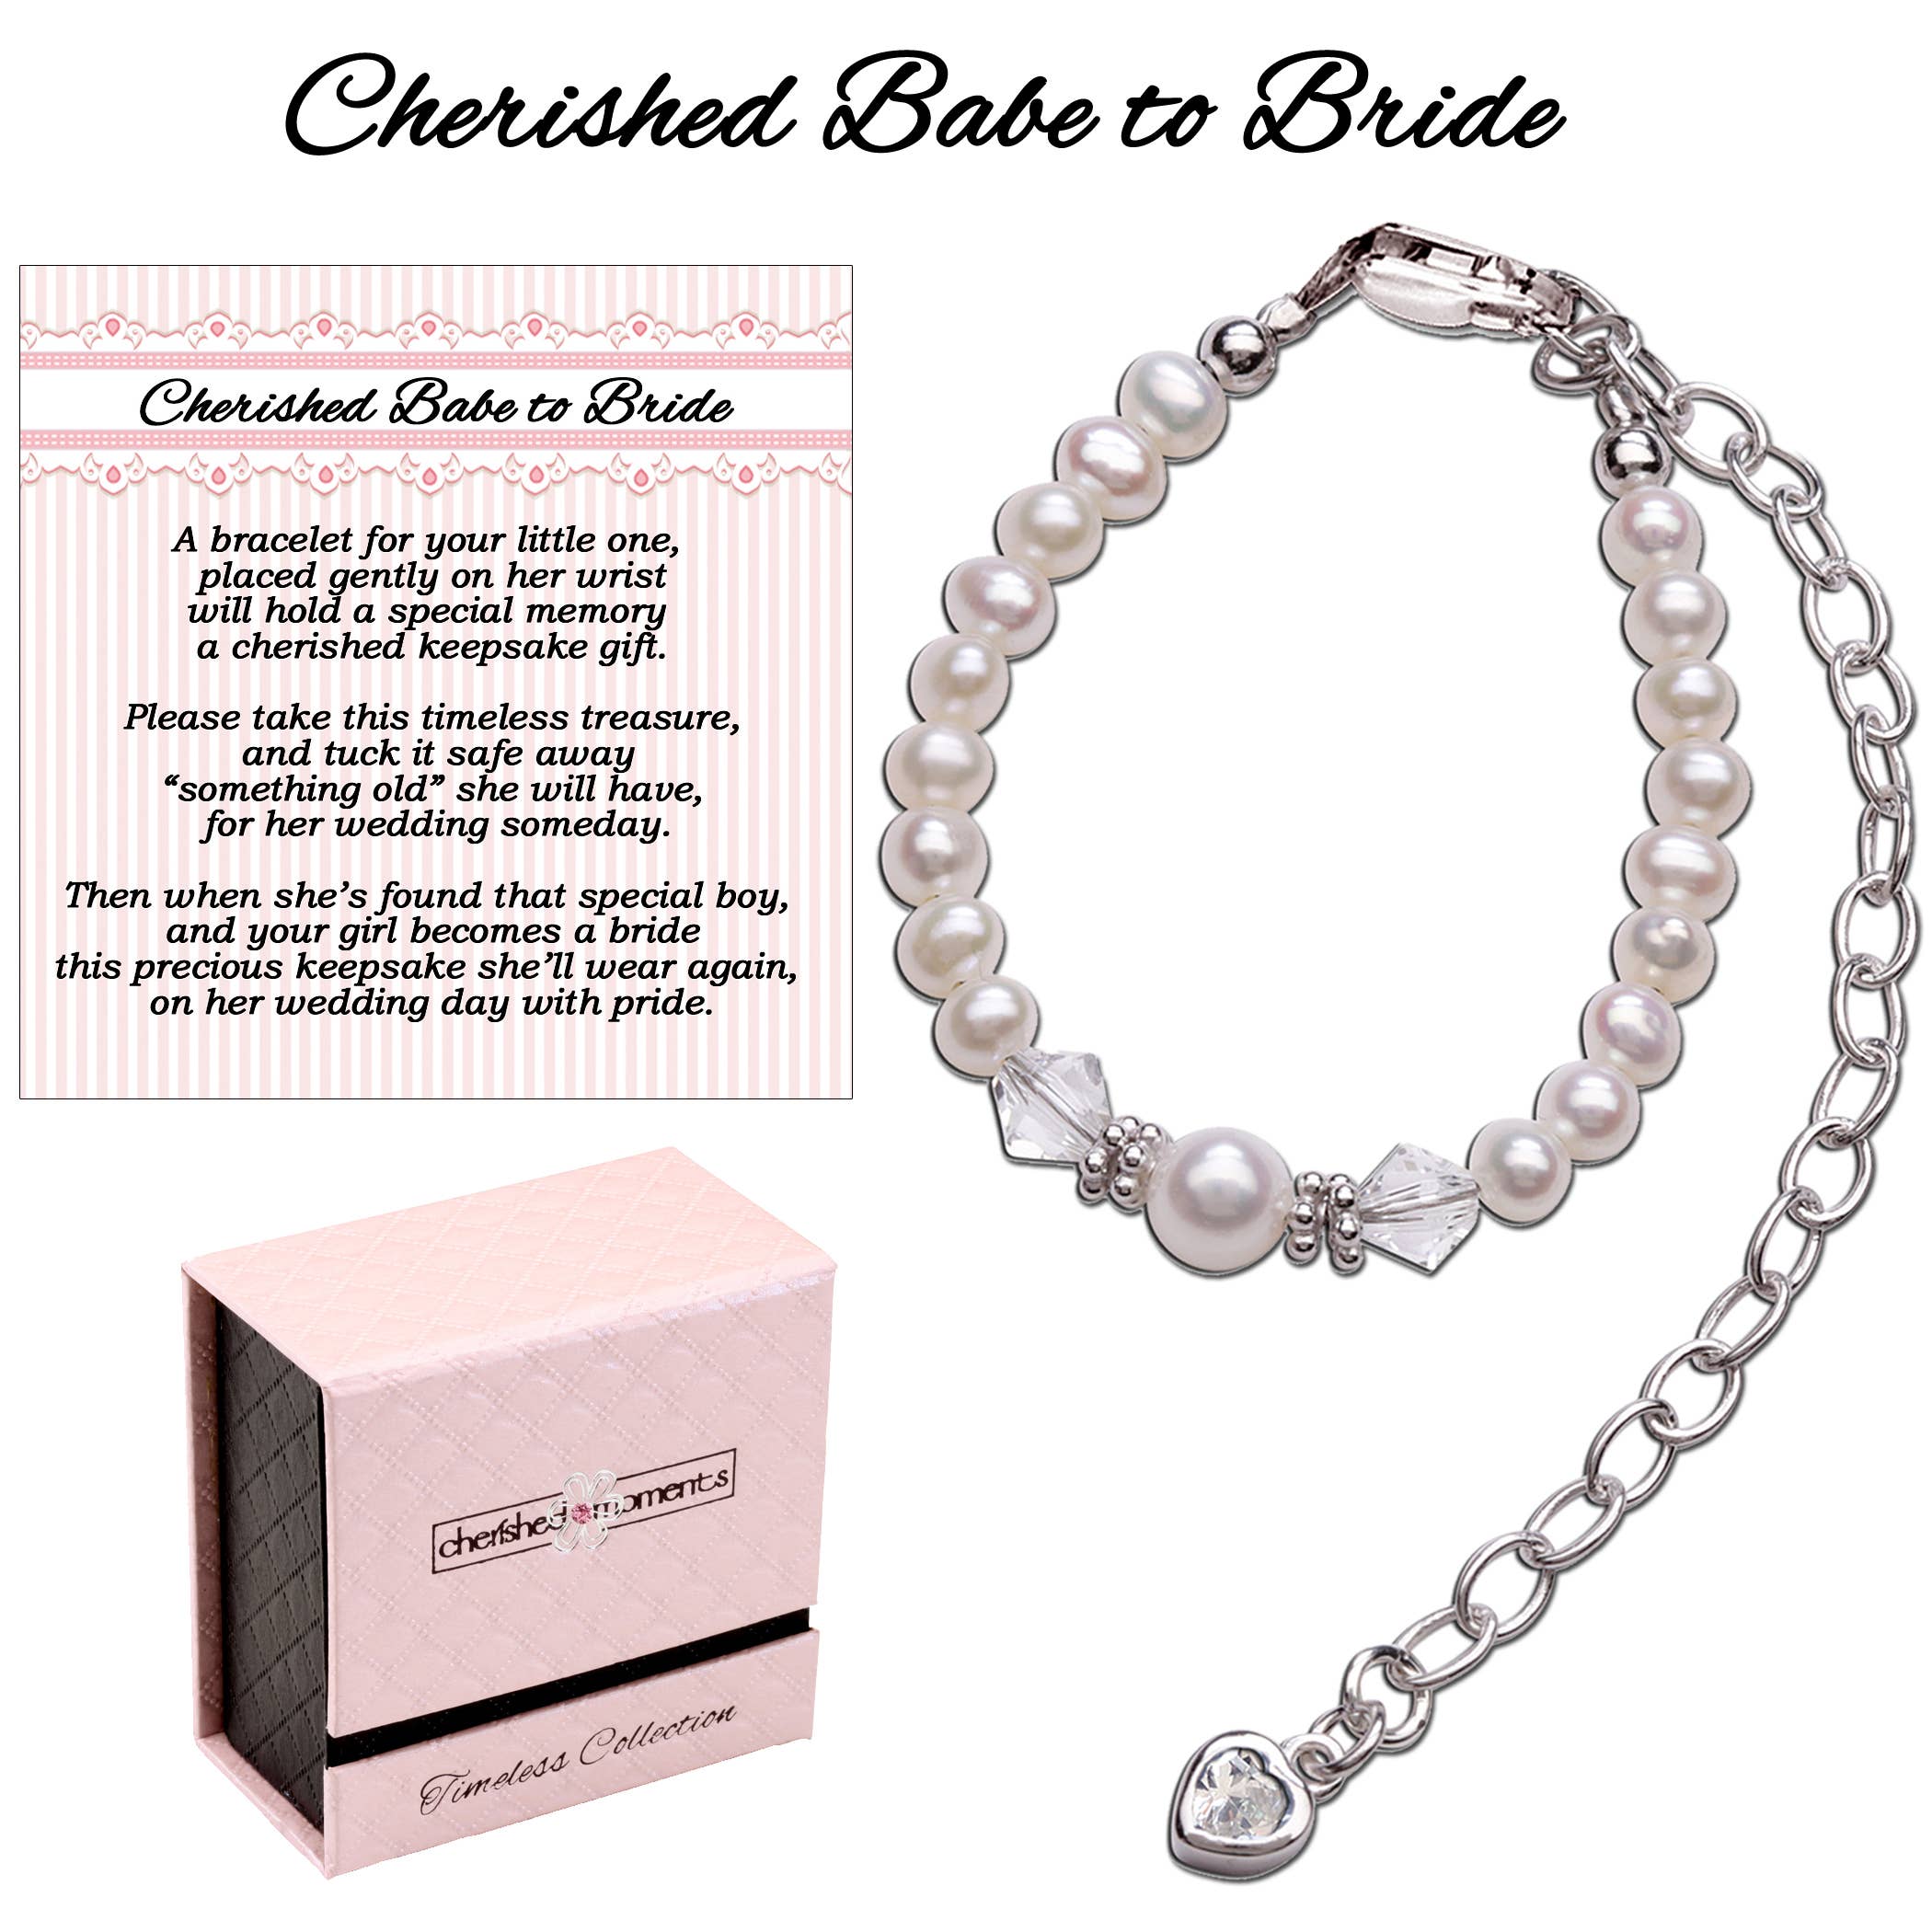 CHERISHED BABY TO BRIDE STERLING SILVER BABY BRACELET